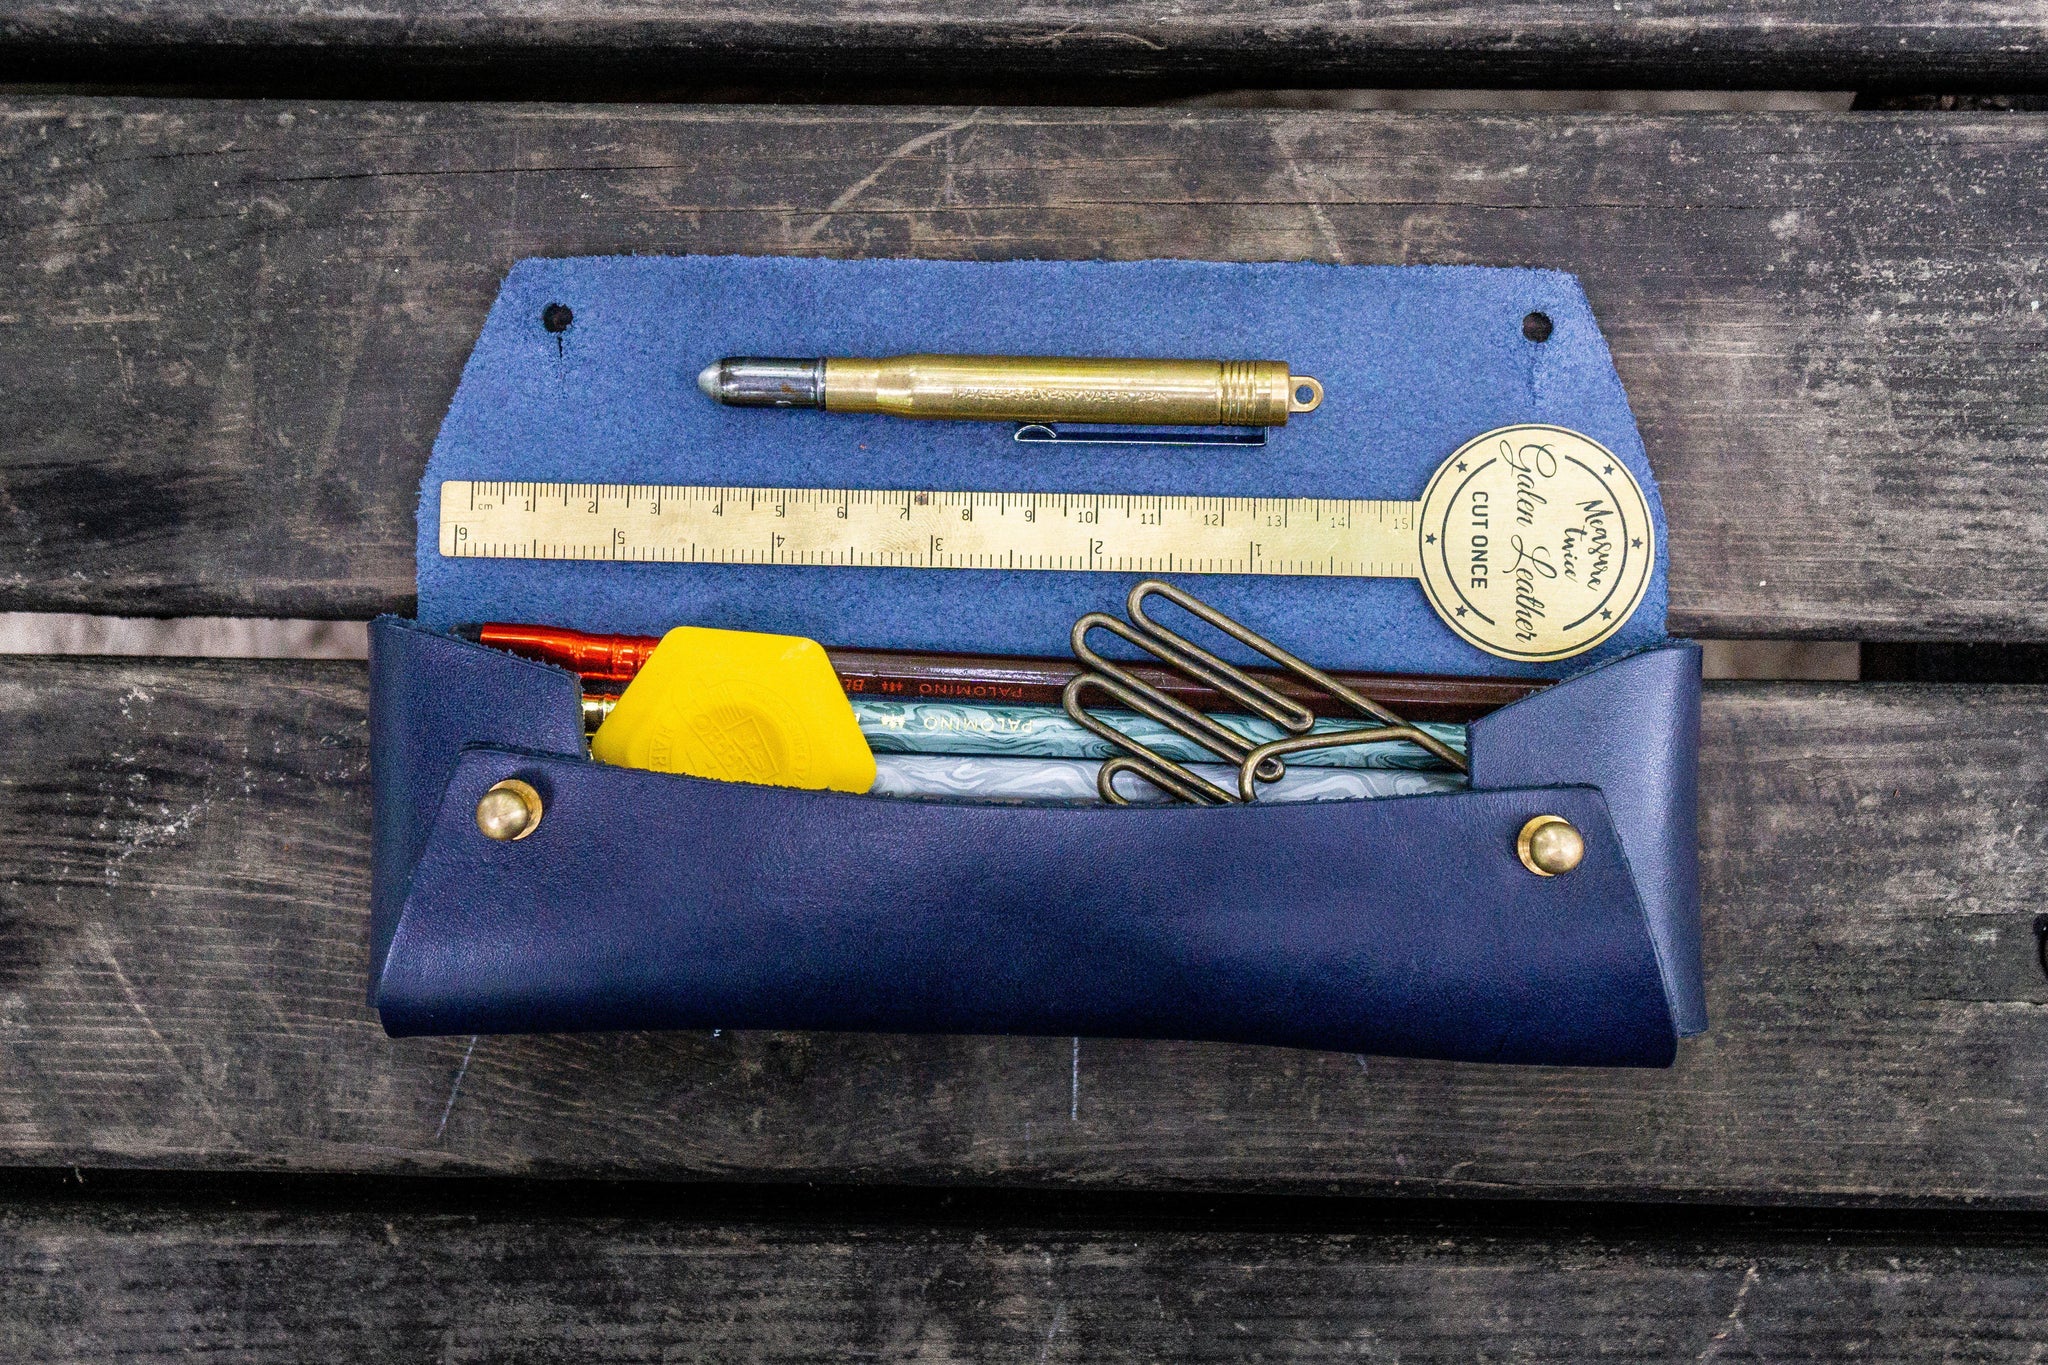 XLarge Zippered Leather Pencil Case - Navy Blue - Galen Leather